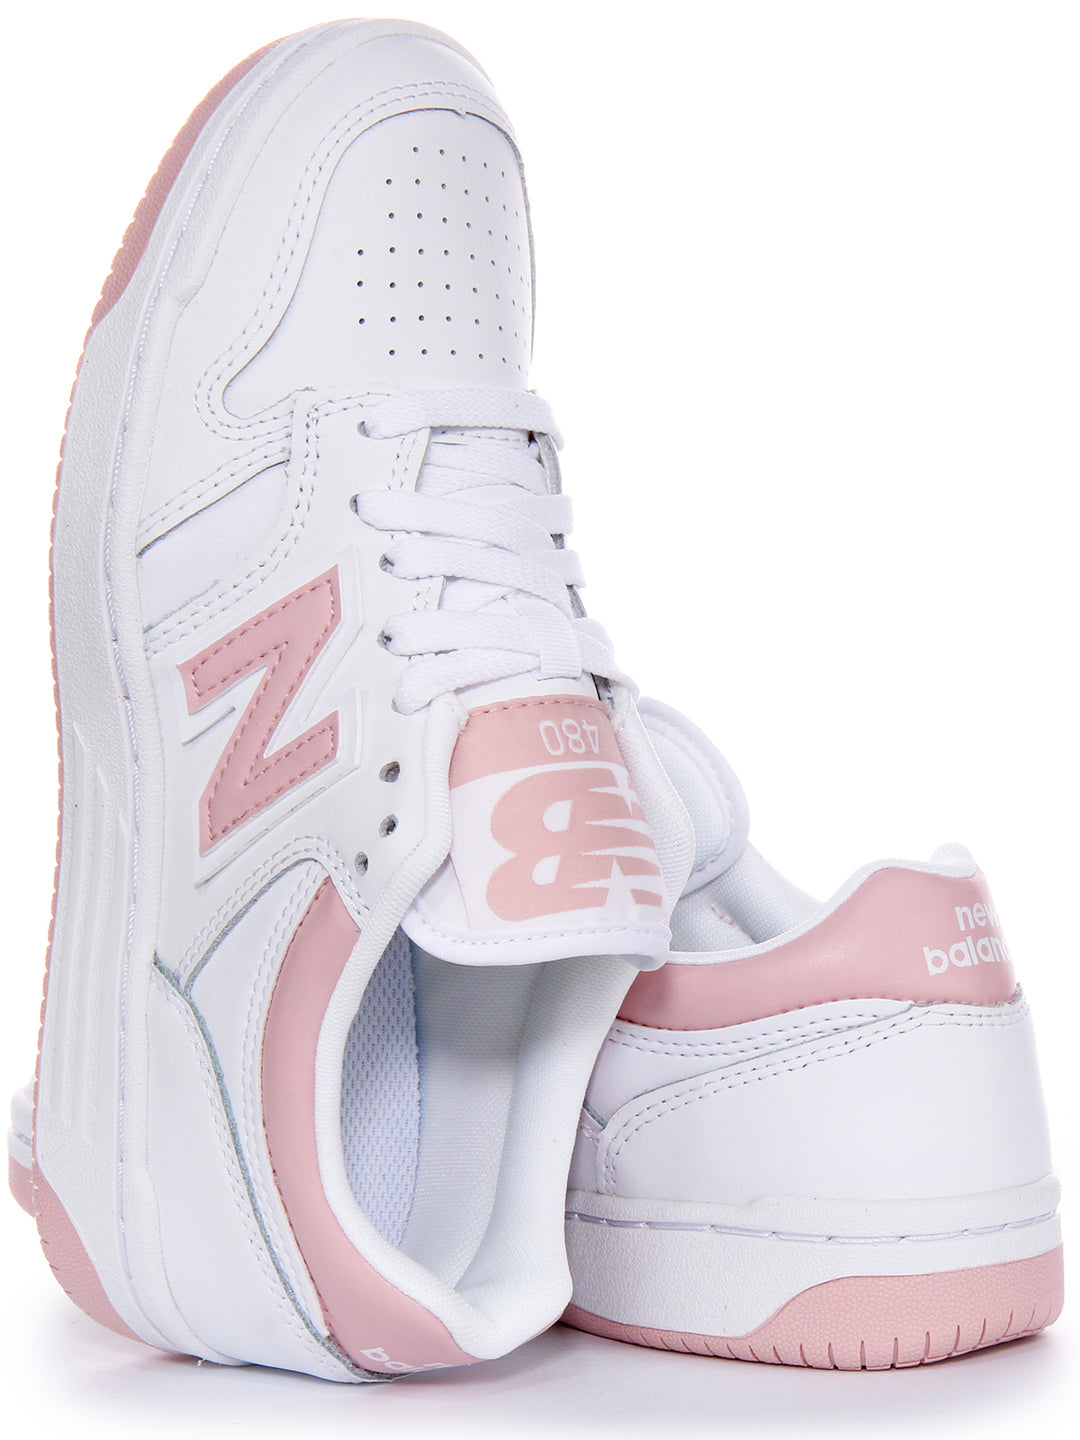 New Balance Unisex BB480LOP Basketball Lace Up Classic TLA Leder Sneaker In Weiß Pink